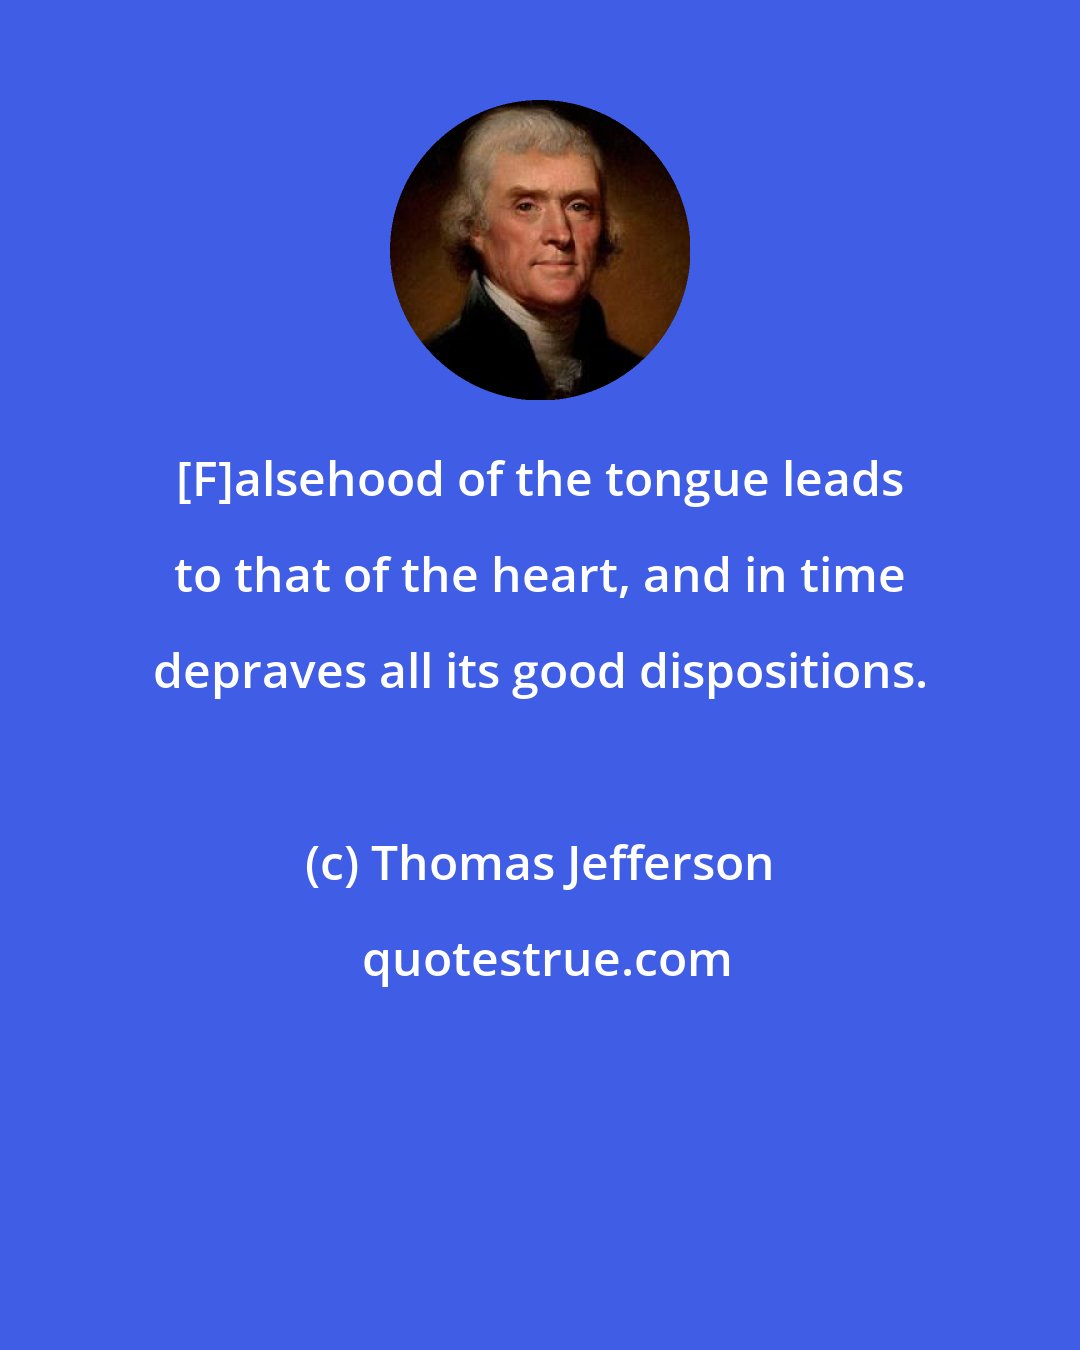 Thomas Jefferson: [F]alsehood of the tongue leads to that of the heart, and in time depraves all its good dispositions.